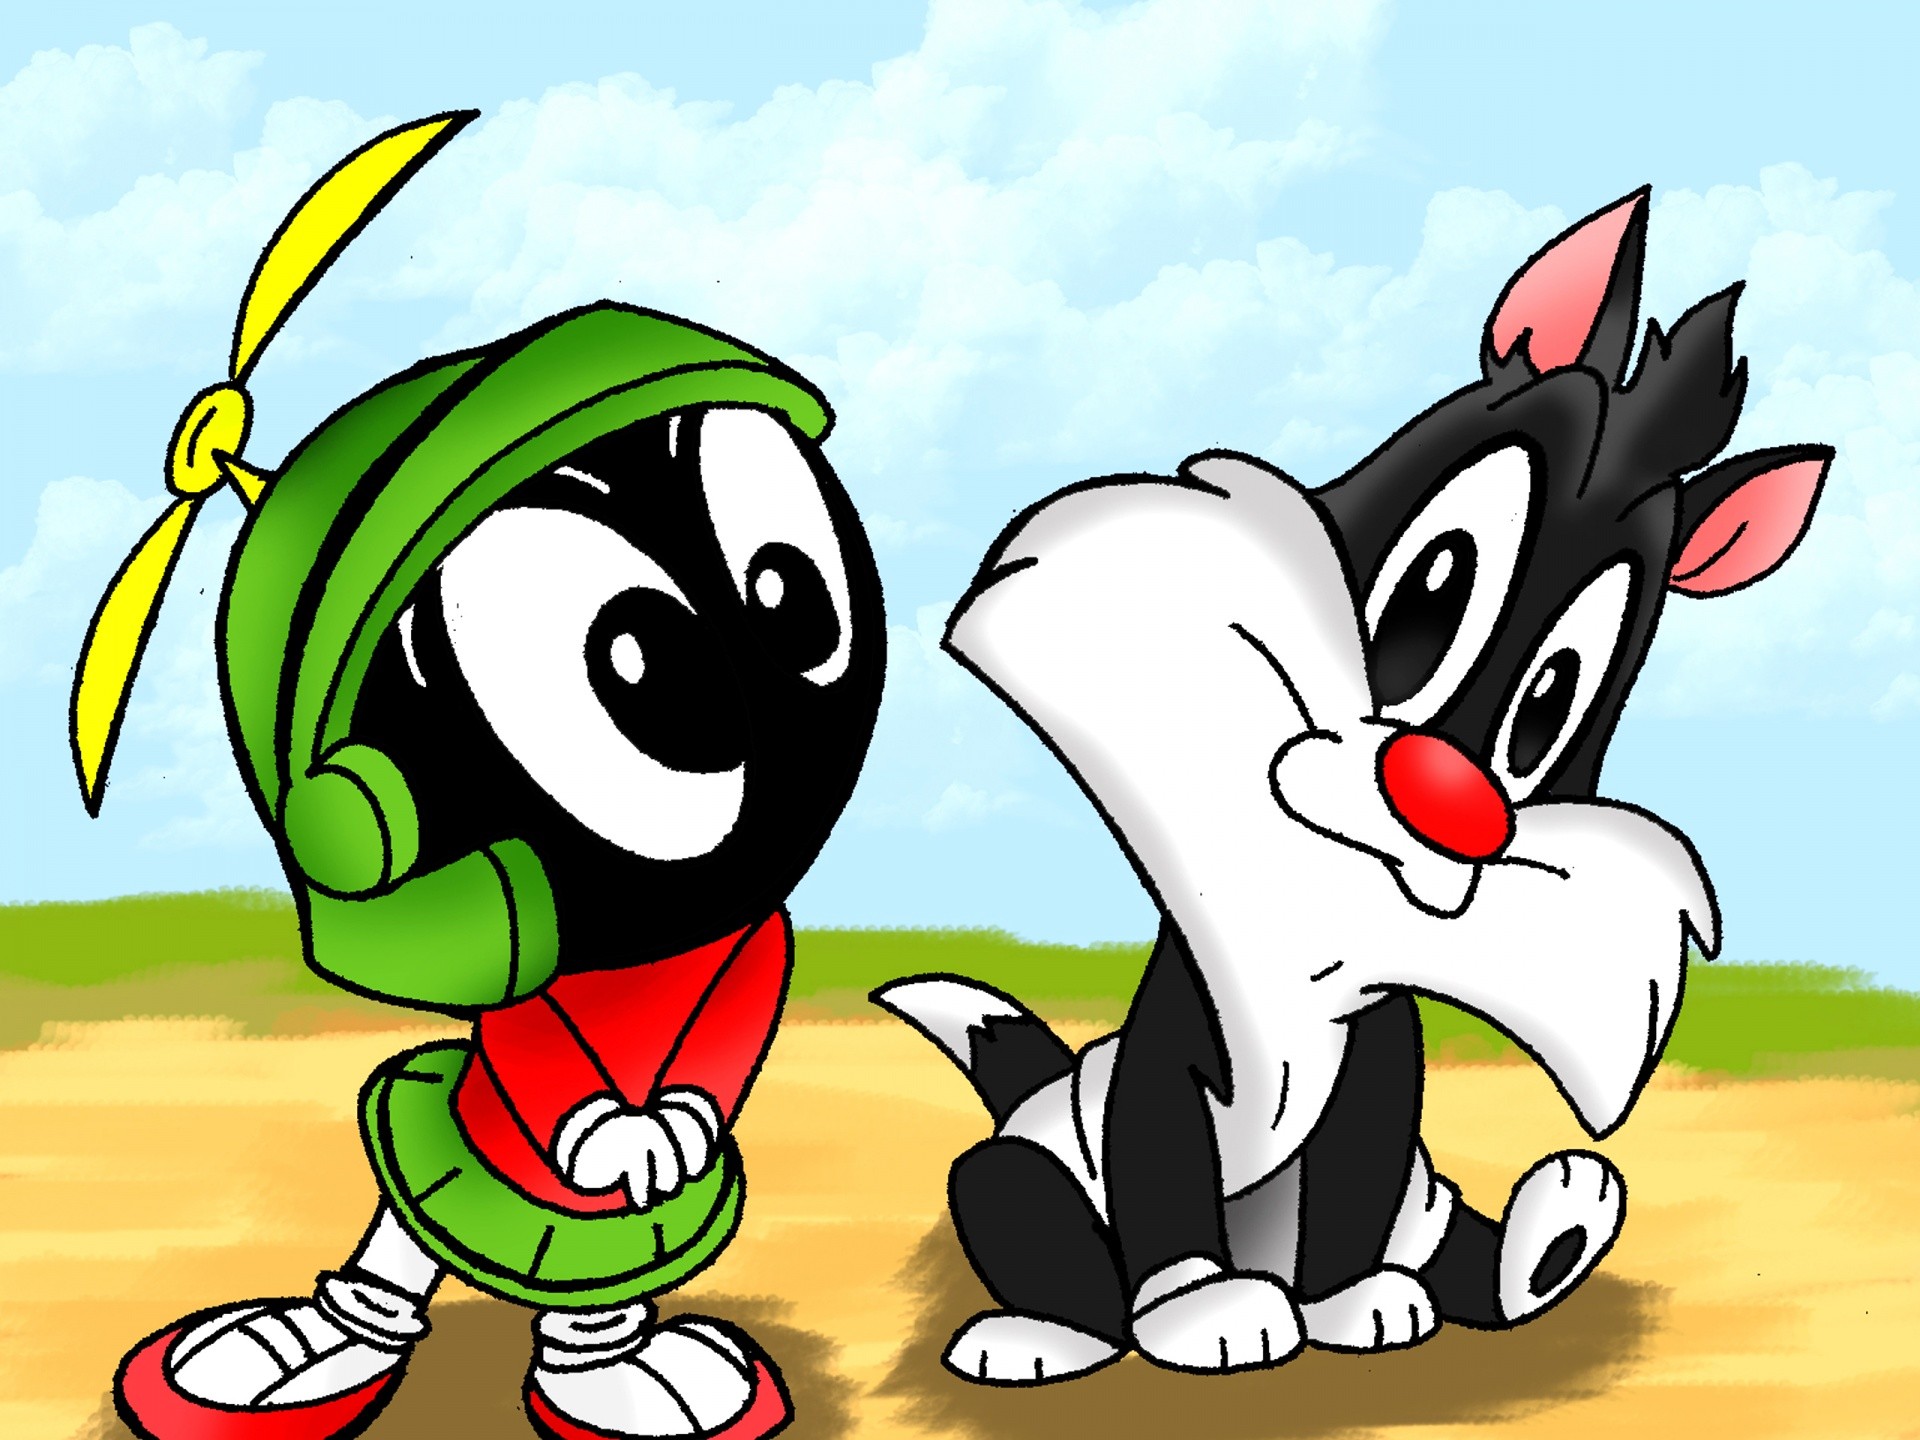 1920x1440 Displaying 10> Images For - Baby Looney Tunes Wallpaper.